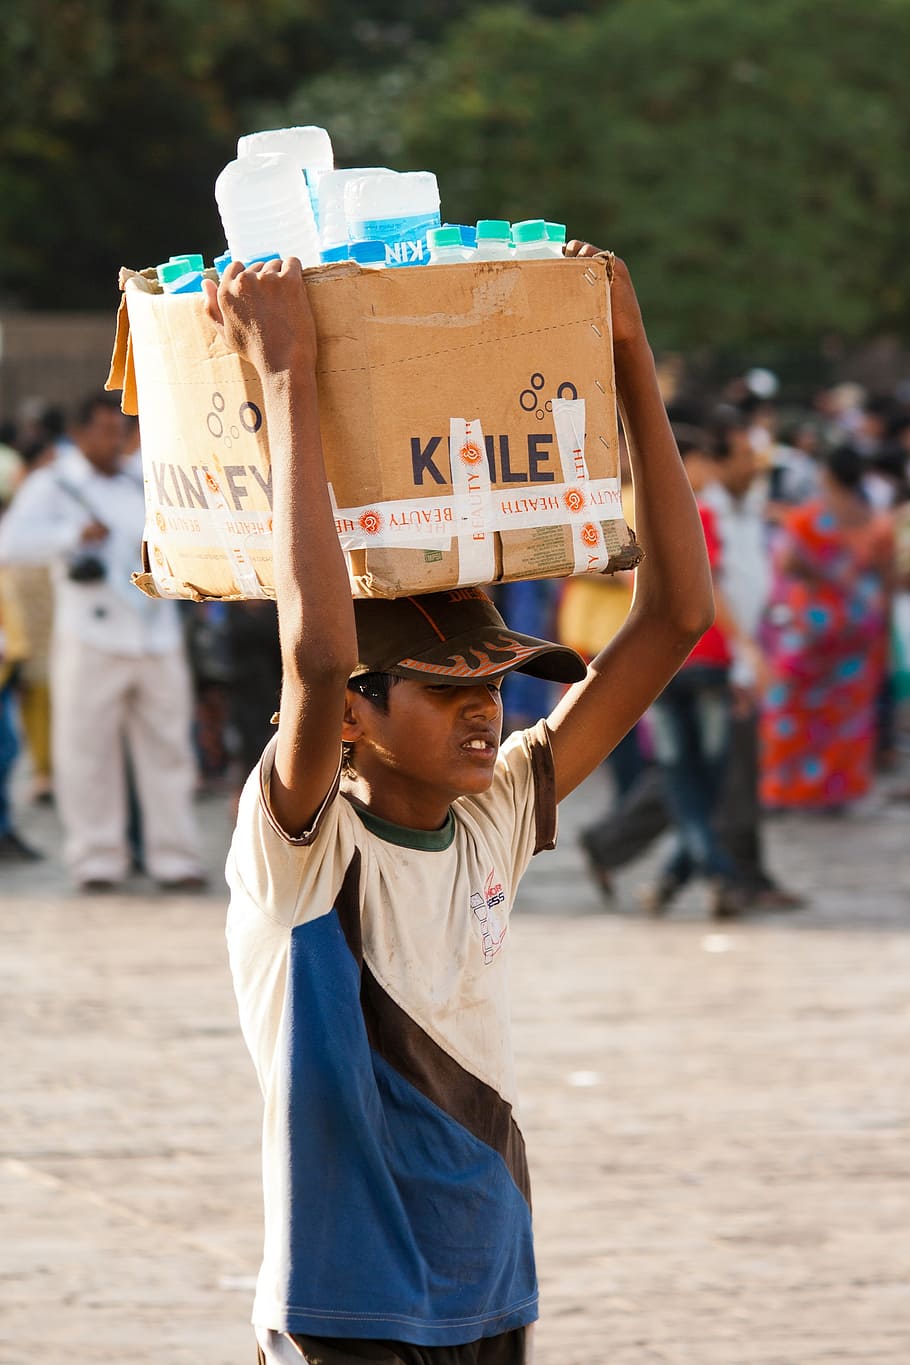 water, seller, india, boy, head, carry, box, people, asia, vendor